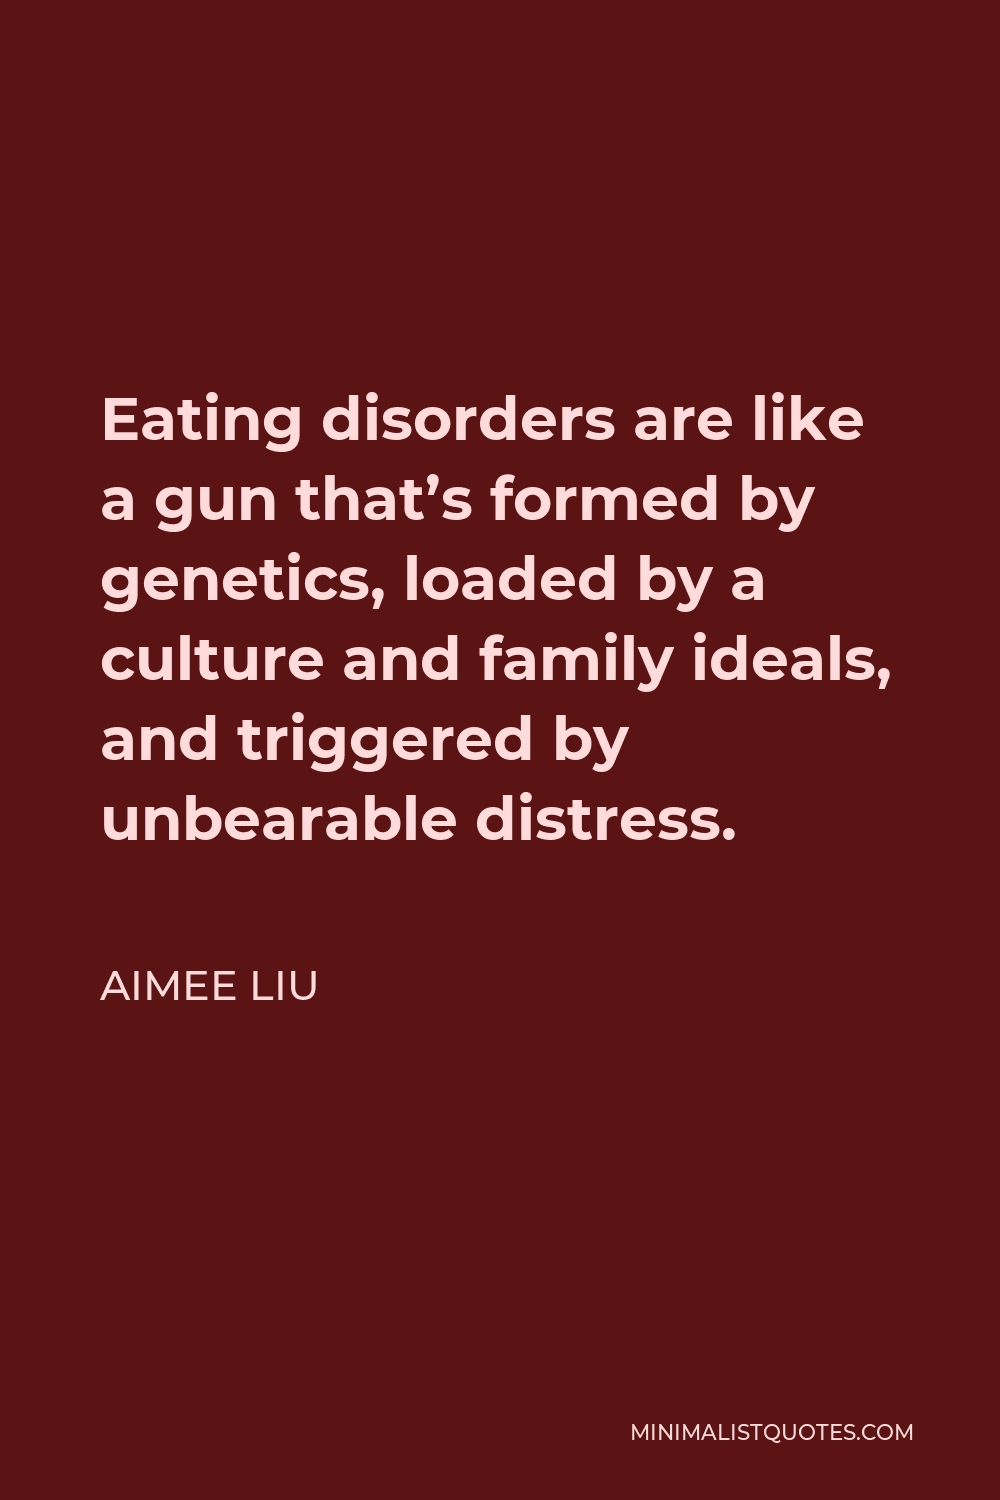 Aimee Liu Quote - Eating disorders are like a gun that’s formed by genetics, loaded by a culture and family ideals, and triggered by unbearable distress.